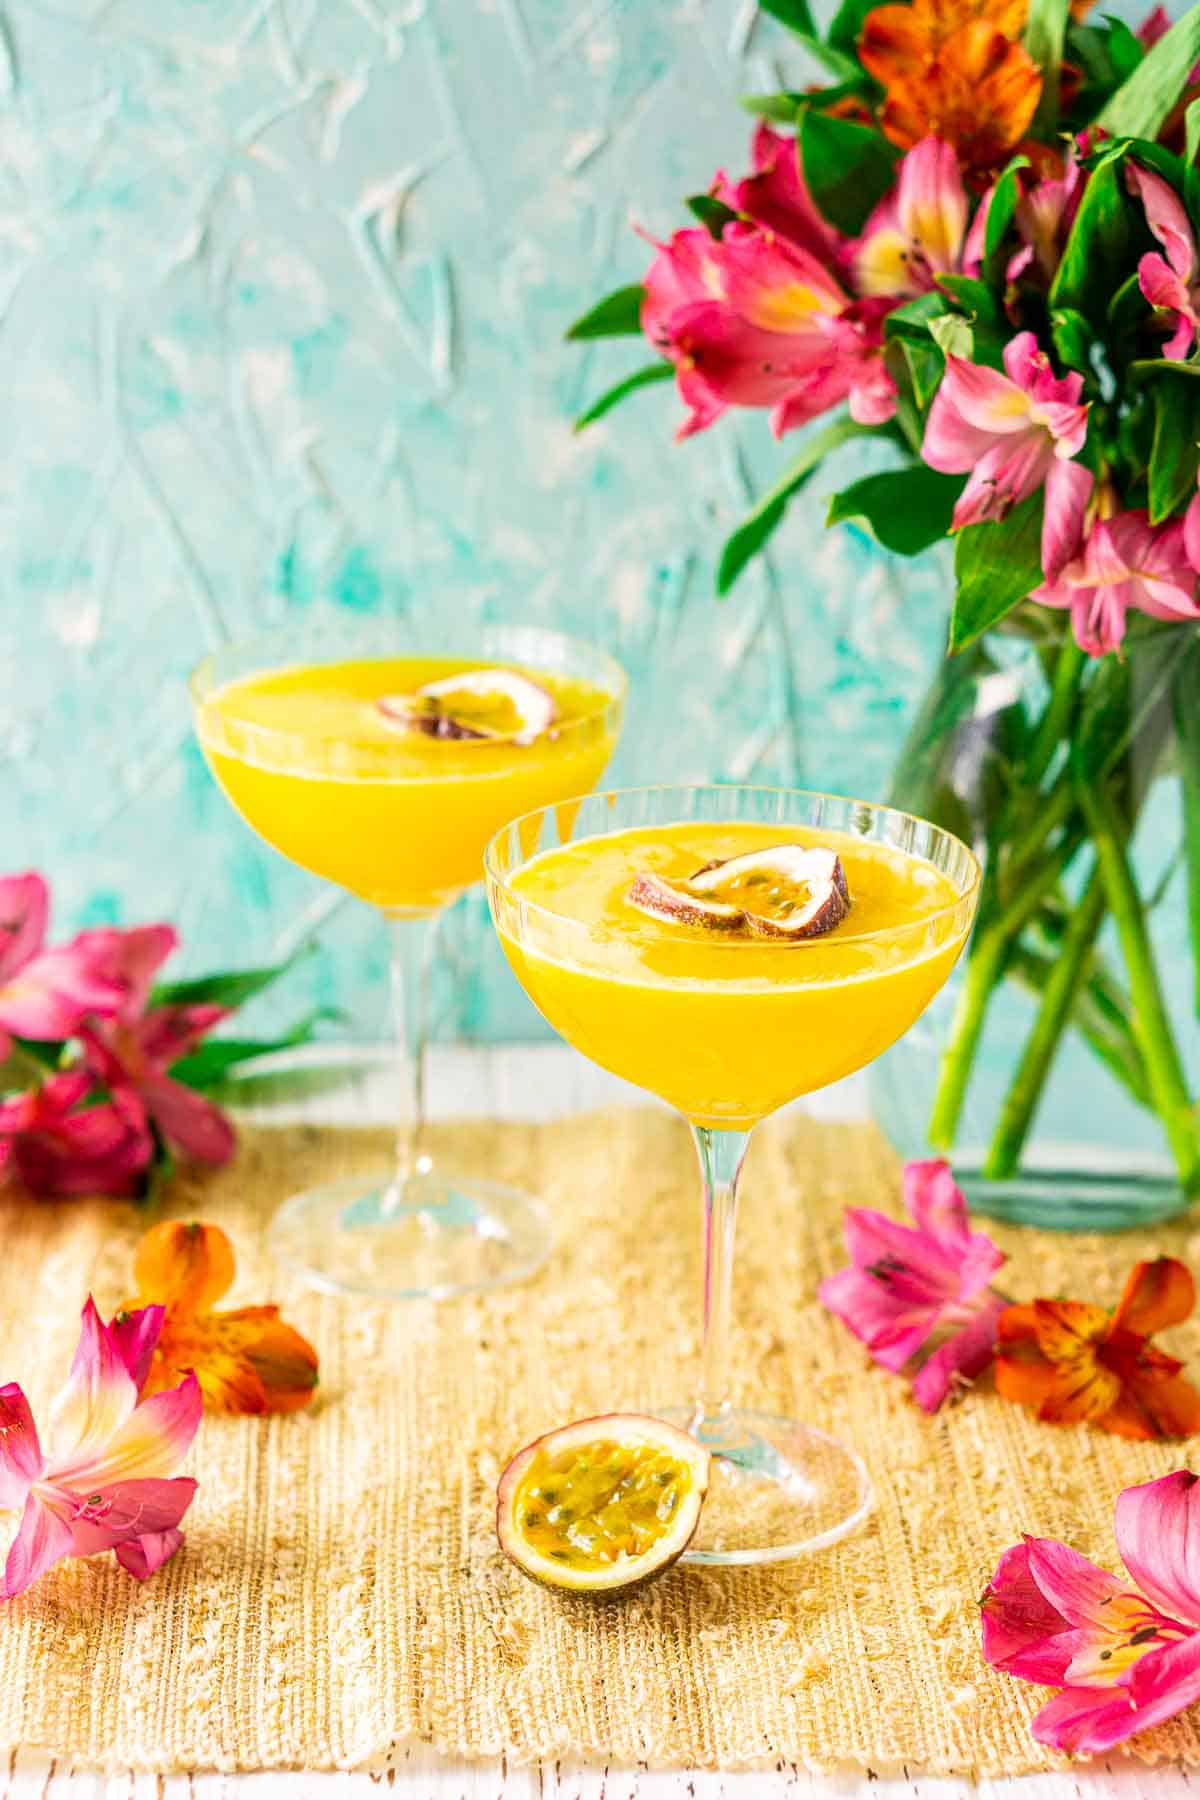 Two passion fruit martini cocktails on a straw placemat against a blue background with tropical flowers surrounding them on all sides.